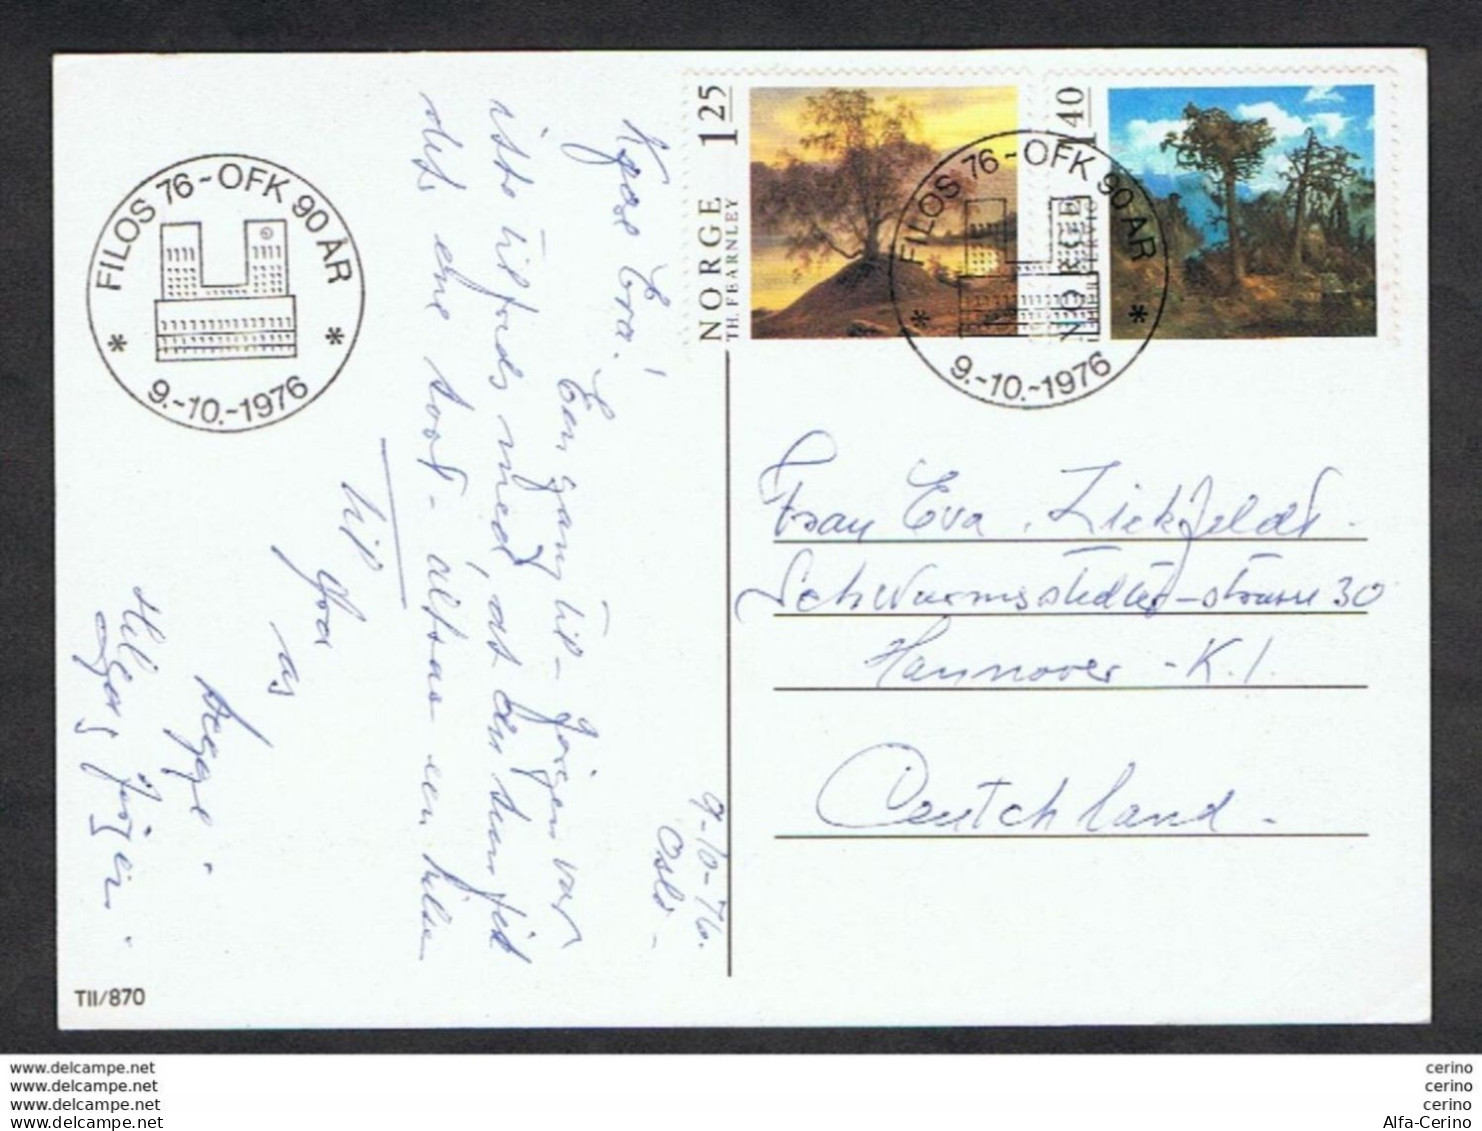 NORWAY: 9-10-1976 ILLUSTRATED POSTCARD "FILOS 76" WITH: 125 Ore + 140 Ore (688 + 689) - TO GERMANY - Briefe U. Dokumente